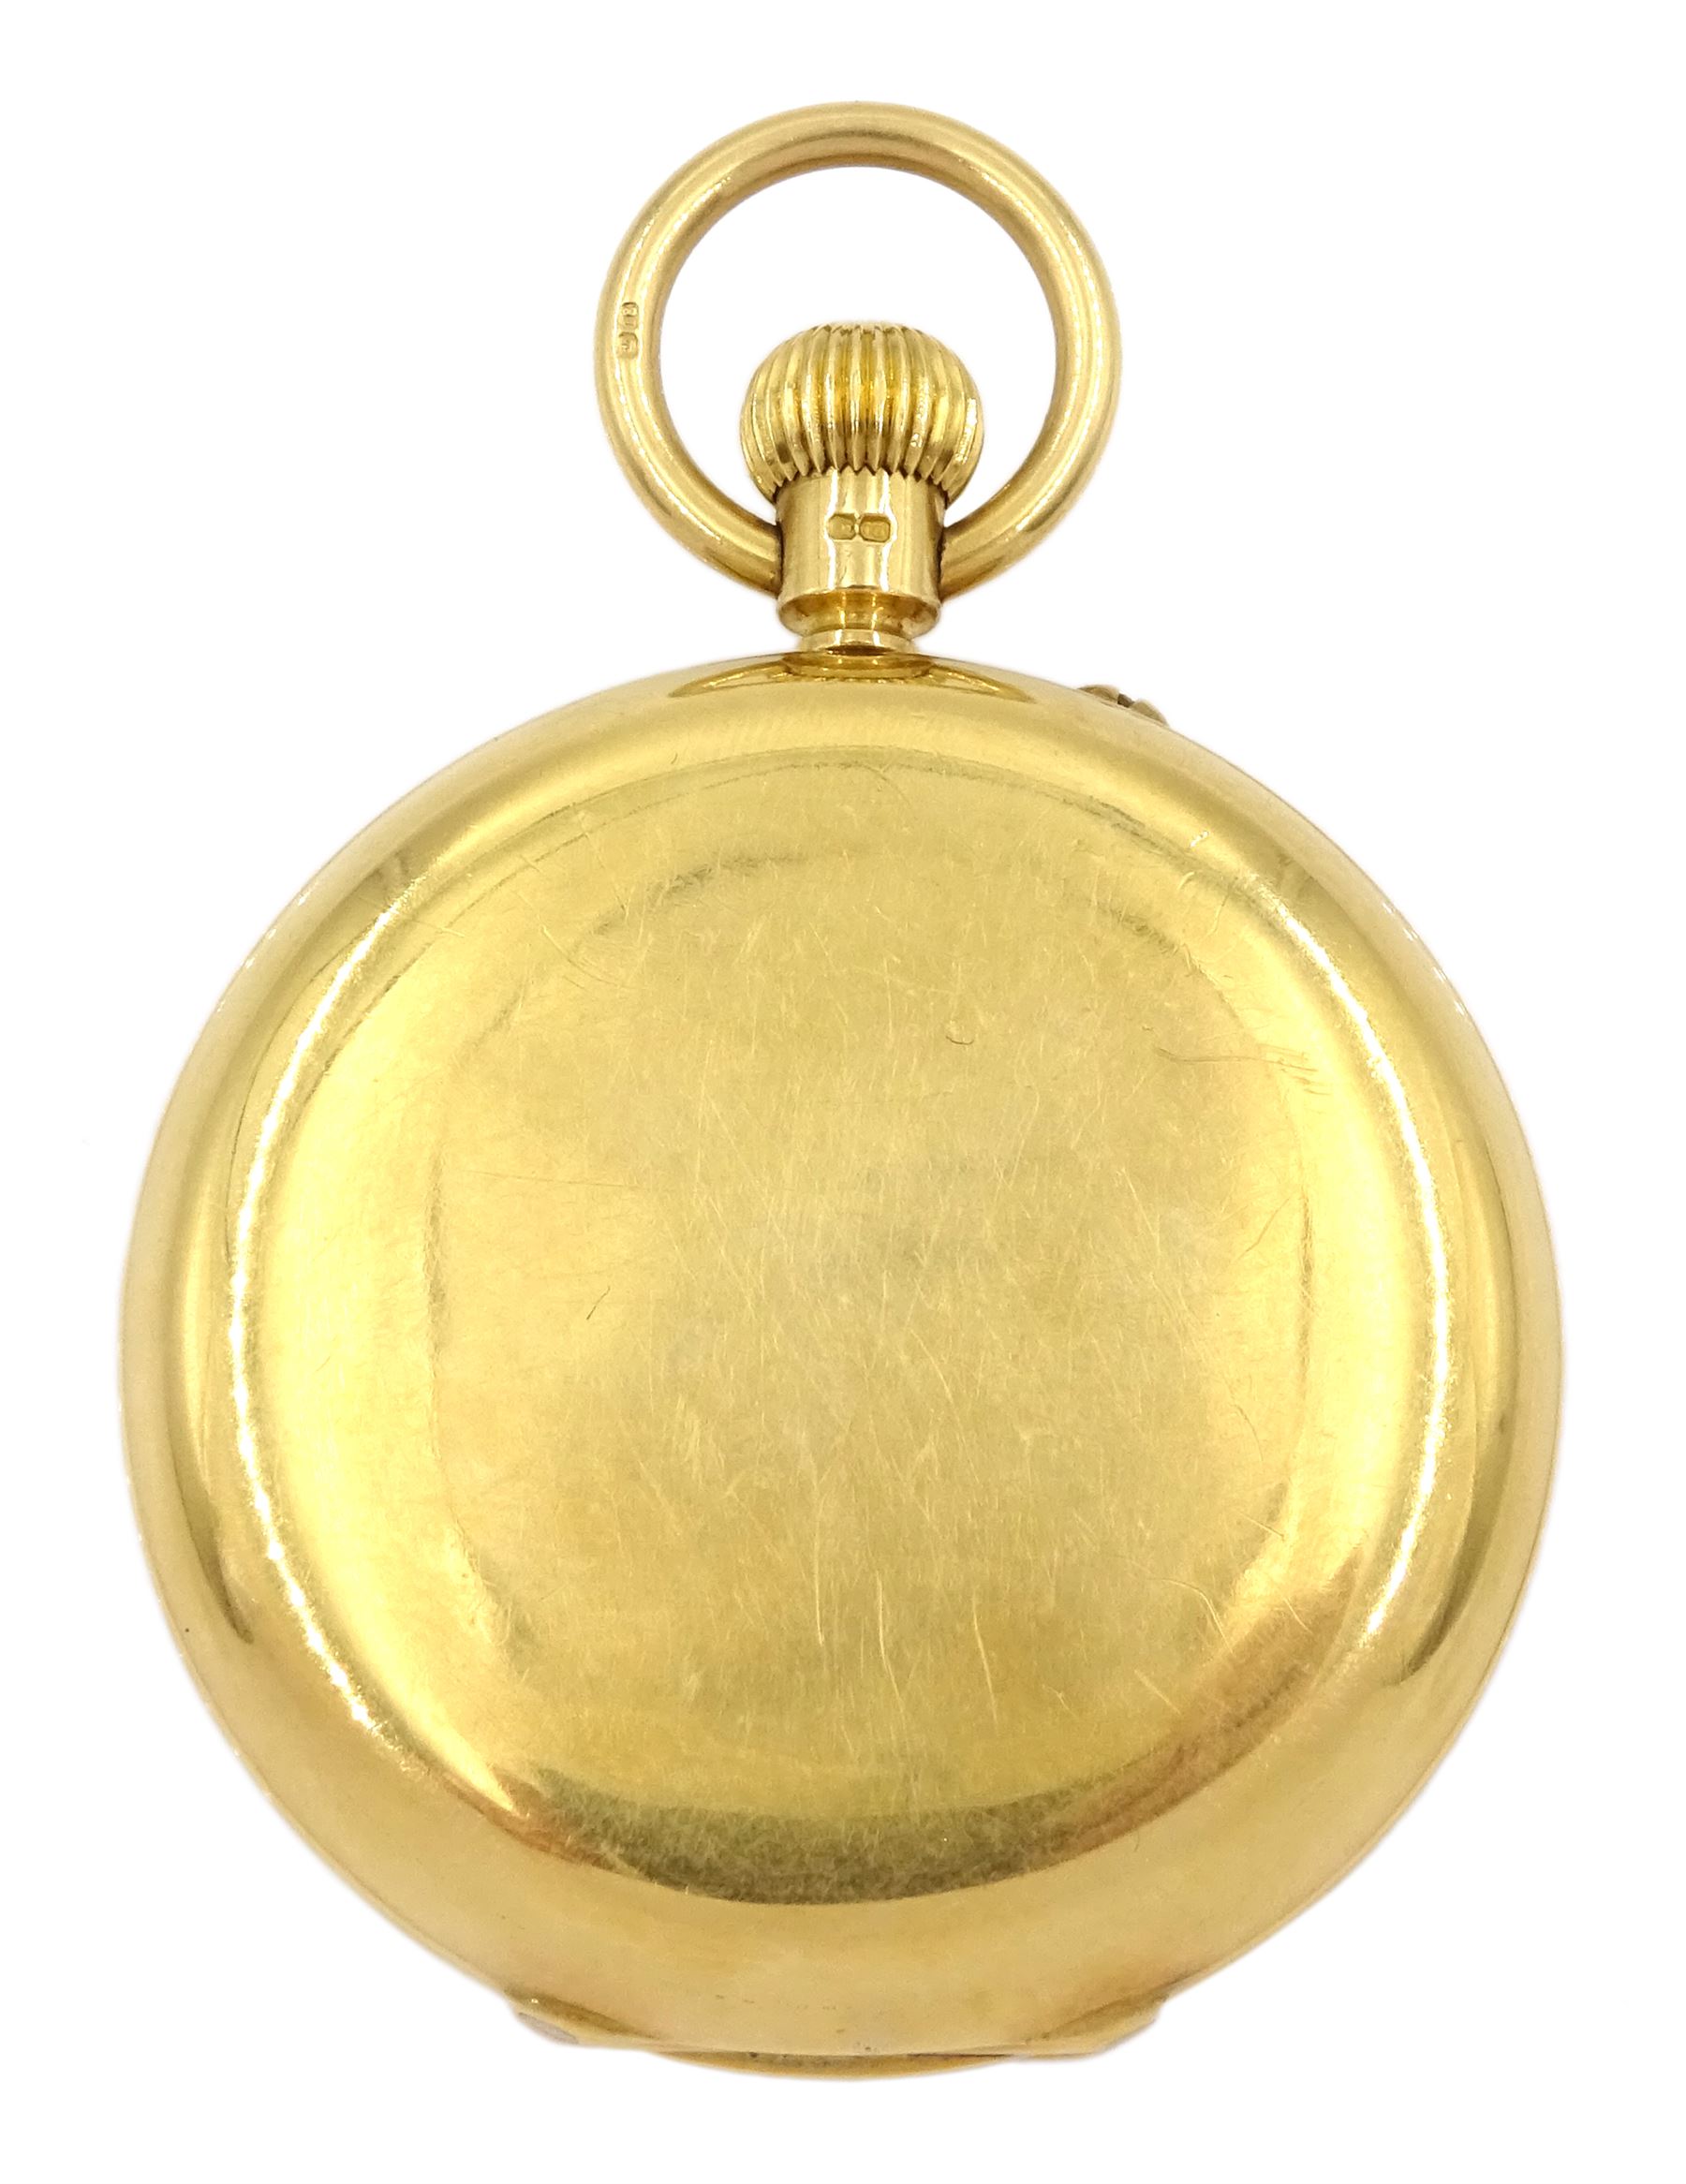 Victorian 18ct gold full hunter keyless lever pocket watch by Walters & George - Image 2 of 4